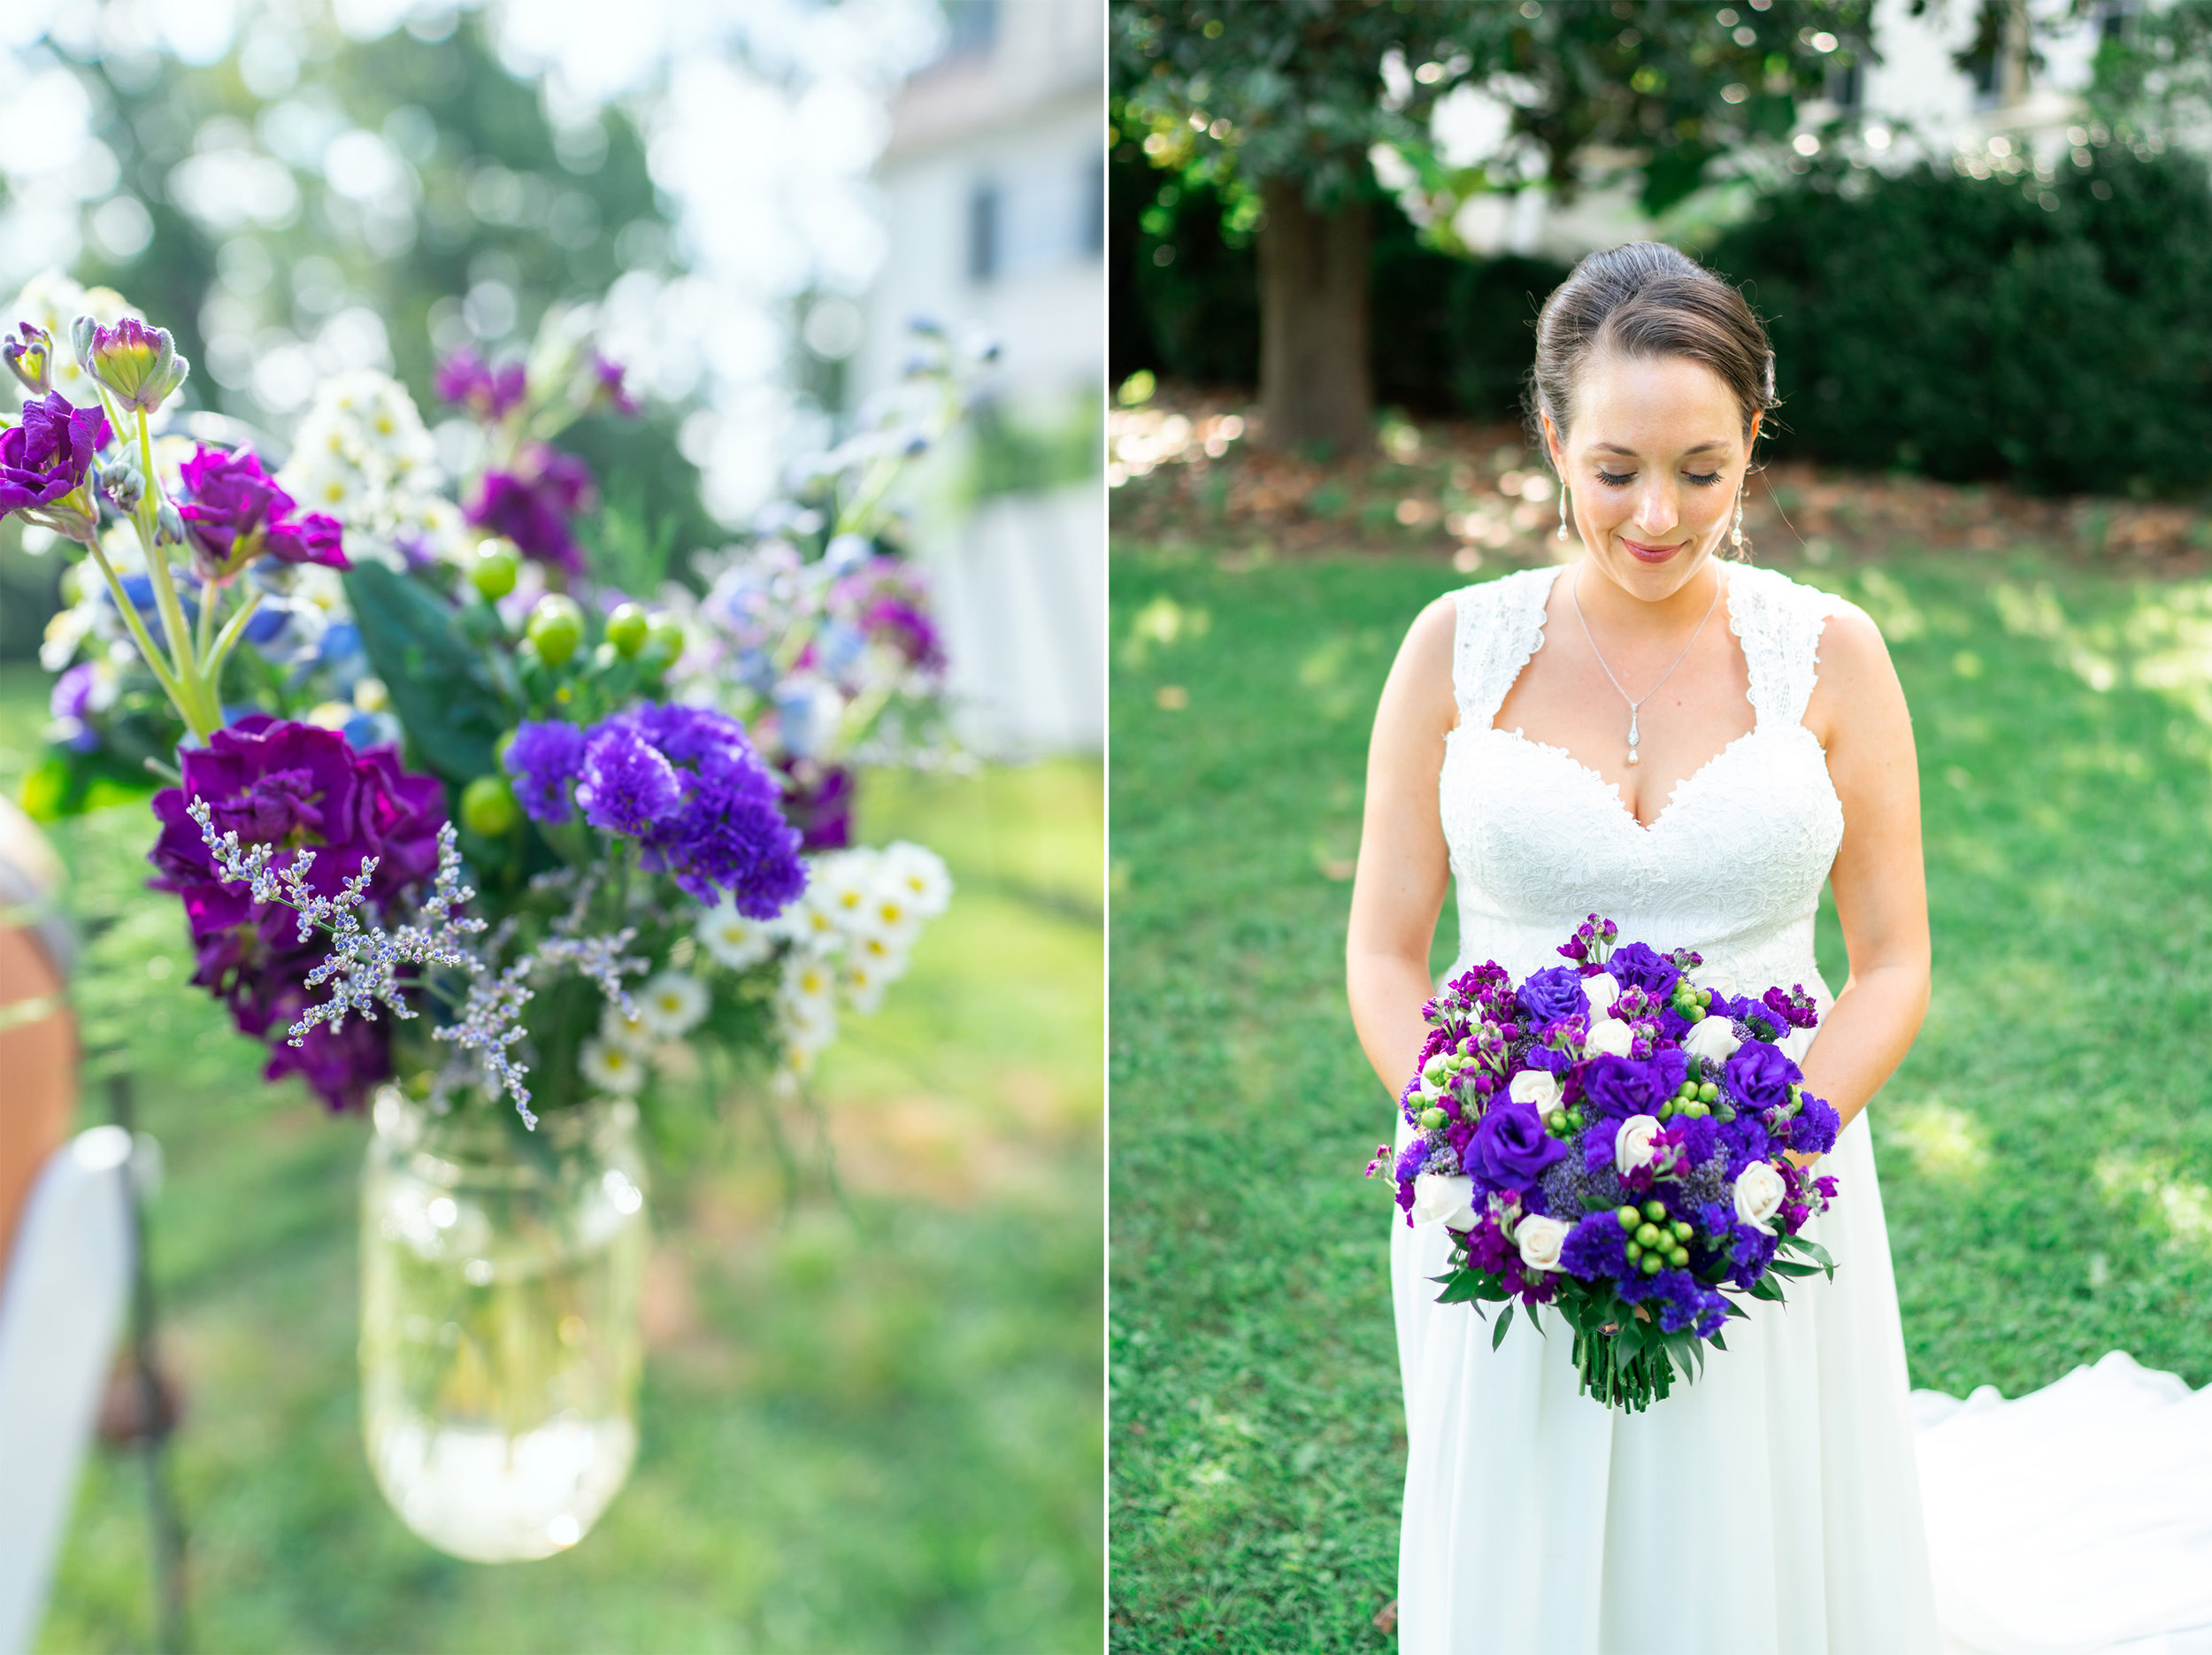 Shepherd's hook with purple flowers and bride with purple bouquet